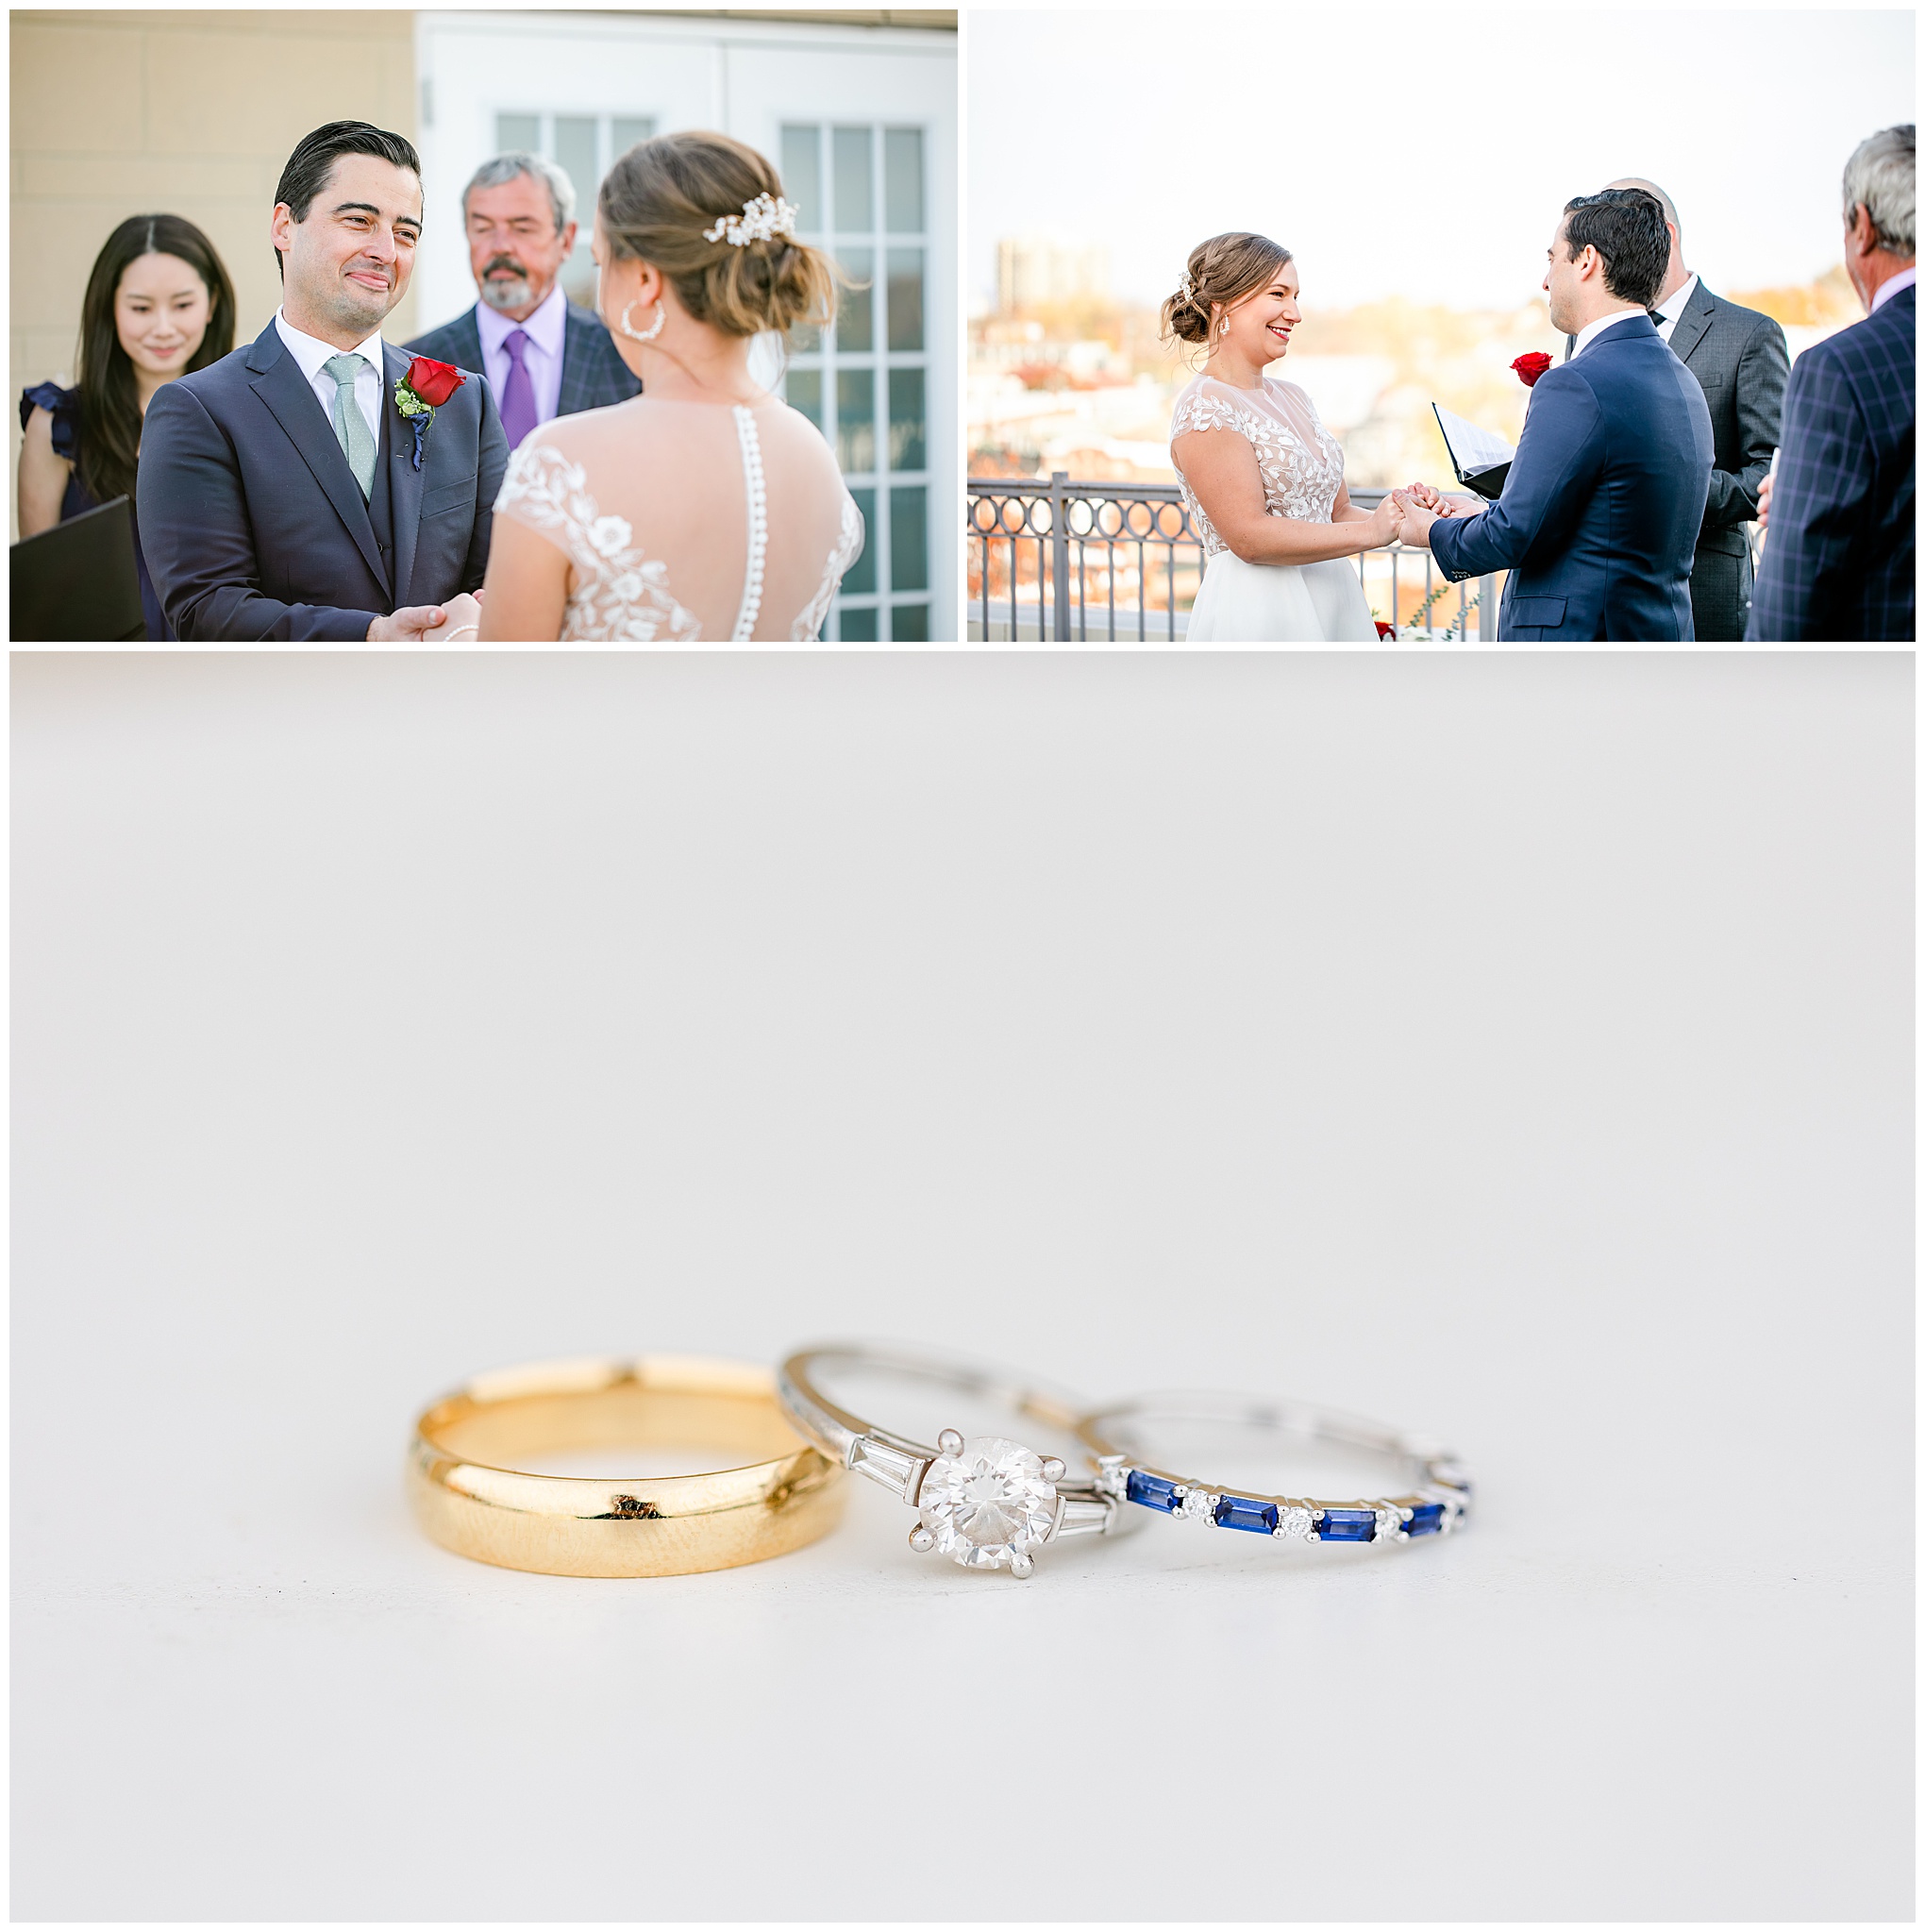 Lorien Alexandria winter wedding, Old Town Alexandria wedding, Alexandria Virginia wedding, DC micro wedding, northern Virginia wedding photographer, Alexandria Virginia wedding photographer, DC wedding photographer, winter wedding aesthetic, Rachel E.H. Photography, blue gold and silver wedding rings, bride and groom looking at each other at alter